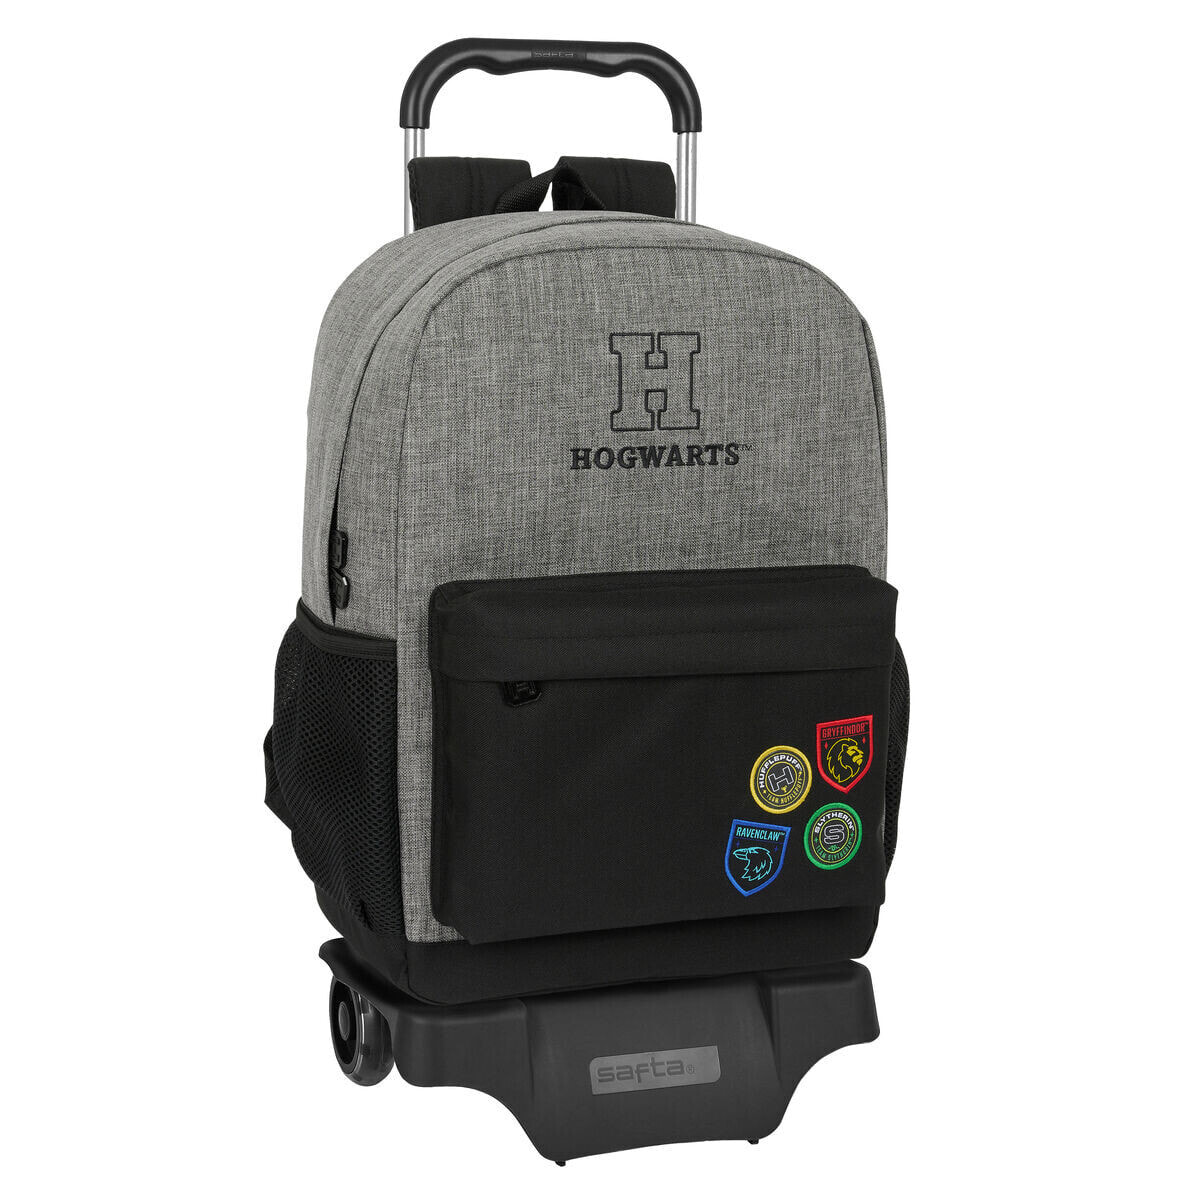 School Rucksack with Wheels Harry Potter House of champions Black Grey 30 x 43 x 14 cm